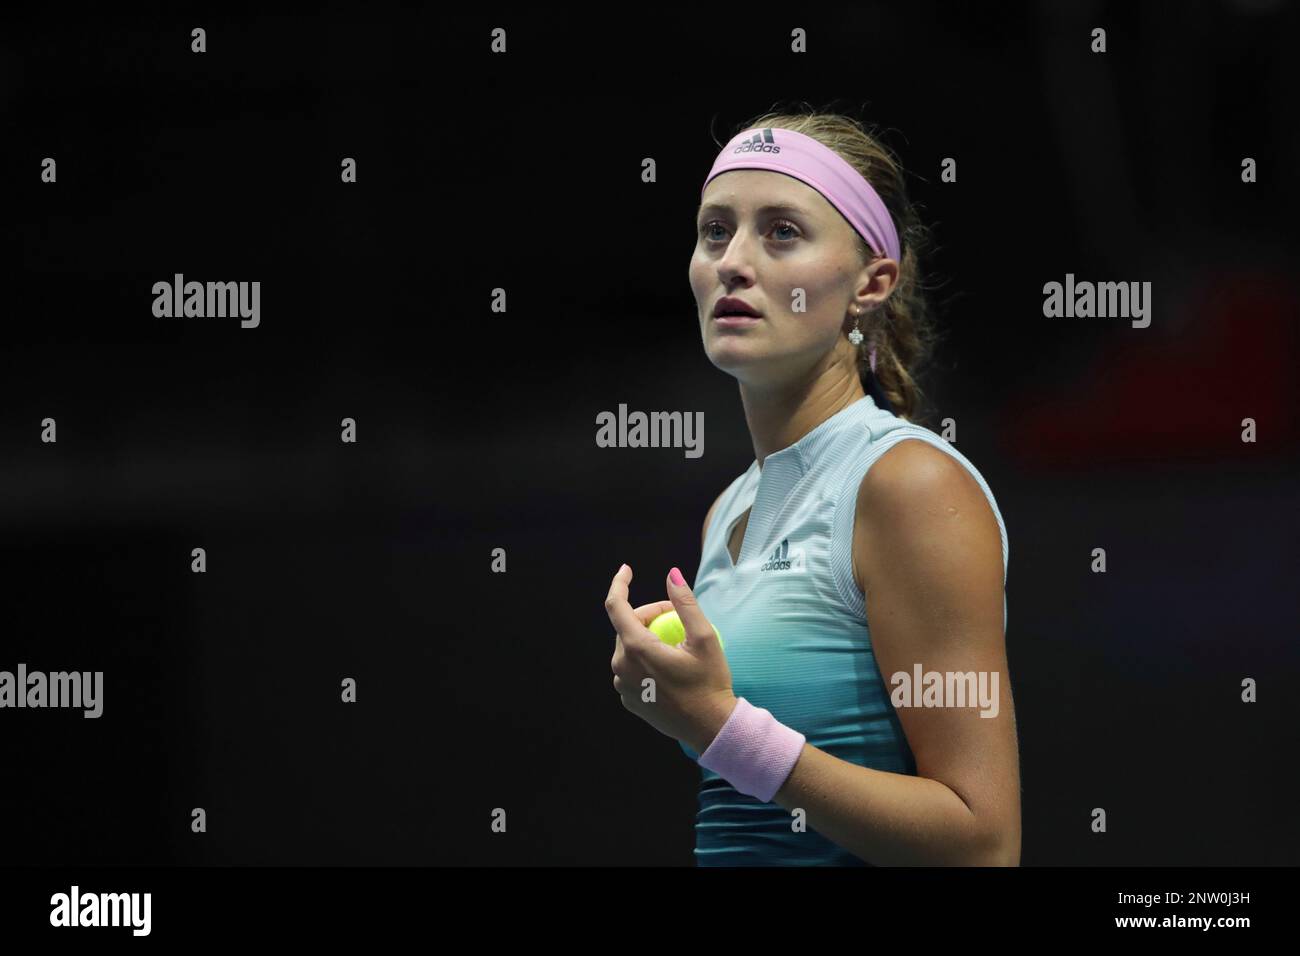 ST. PETERSBURG, RUSSIA - JANUARY 29: Kristina Mladenovic of France during  the St. Petersburg Ladies Trophy 2019 tennis tournament match in St. Petersburg, Russia, 29 Jan. 2019, Sibur Arena, Saint Petersburg, Russia  (Photo